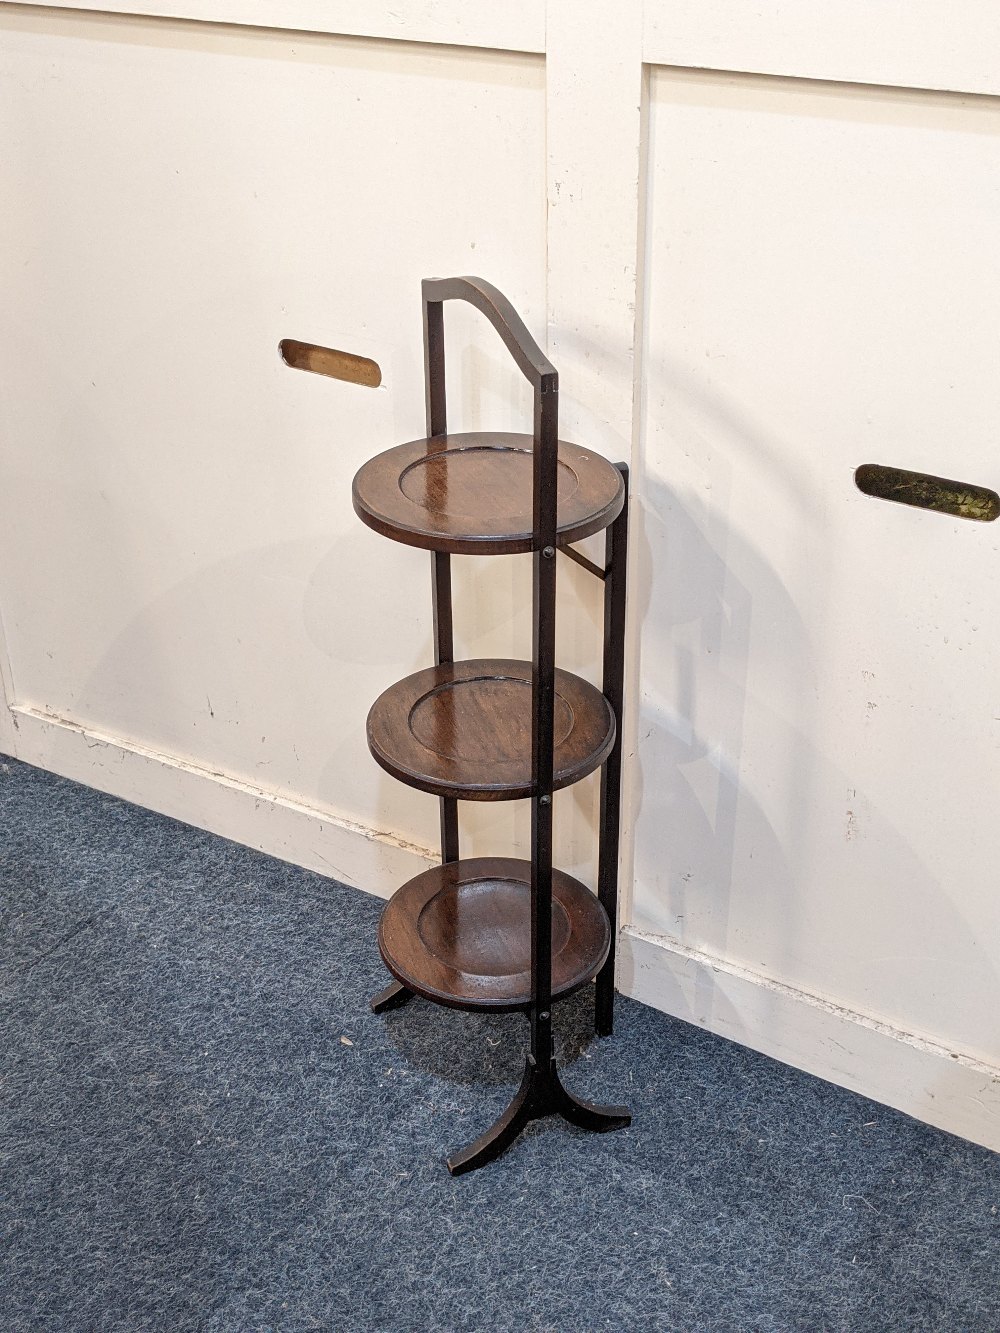 A folding cake stand with three circular dished tiers, 86cm high